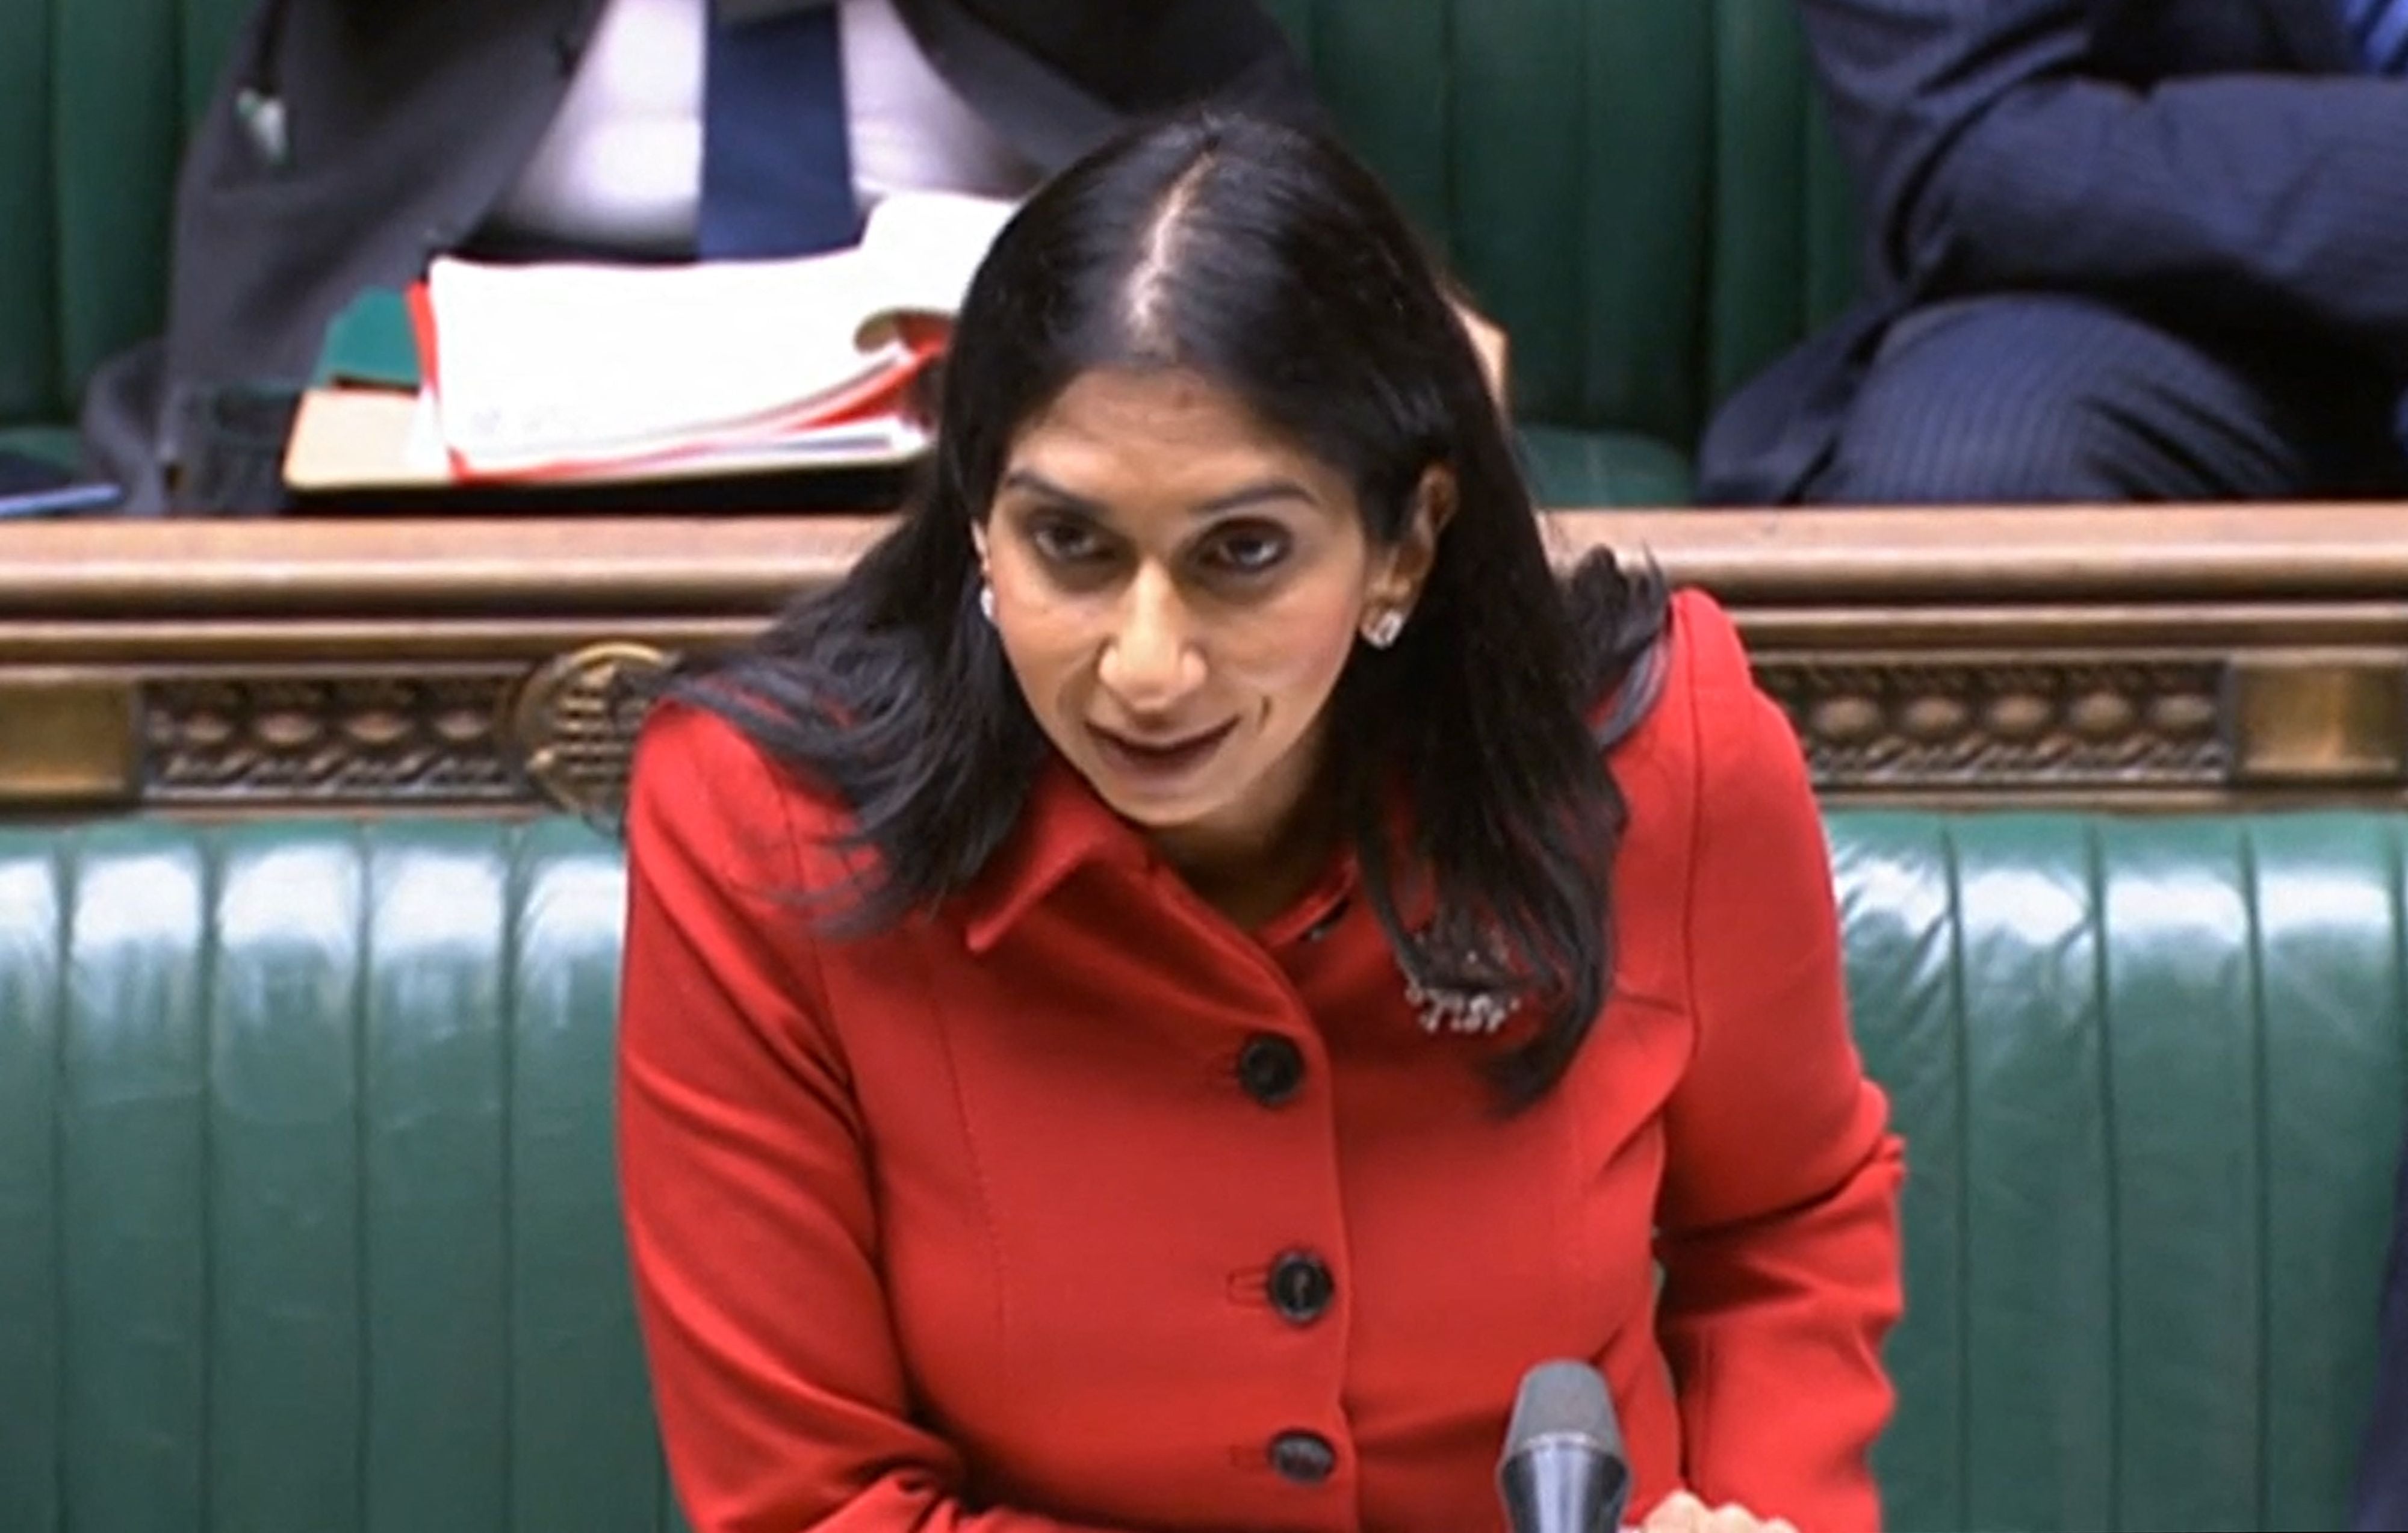 Suella Braverman defended the government’s response in parliament on Monday